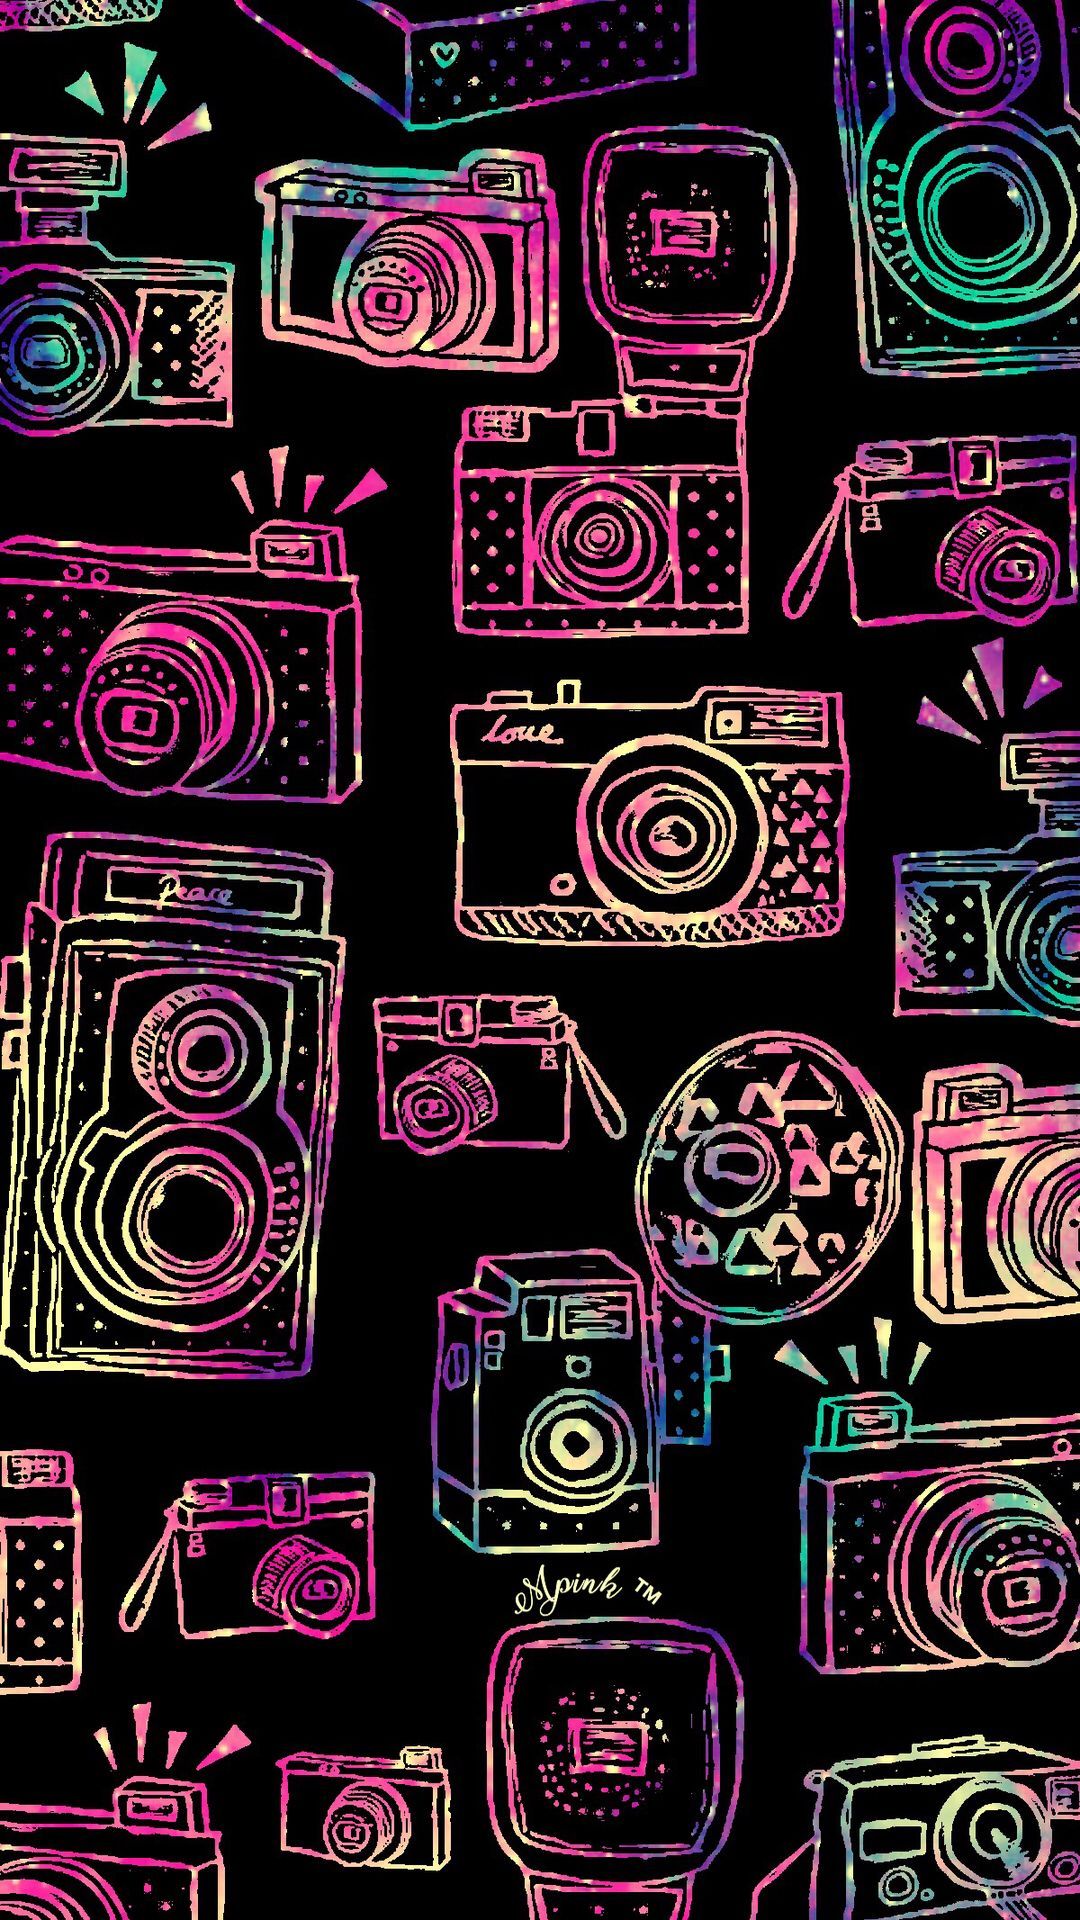 Cute Cameras IPhone Android Wallpaper #neon #cameras #pattern. Camera Wallpaper, Cellphone Wallpaper, Android Wallpaper